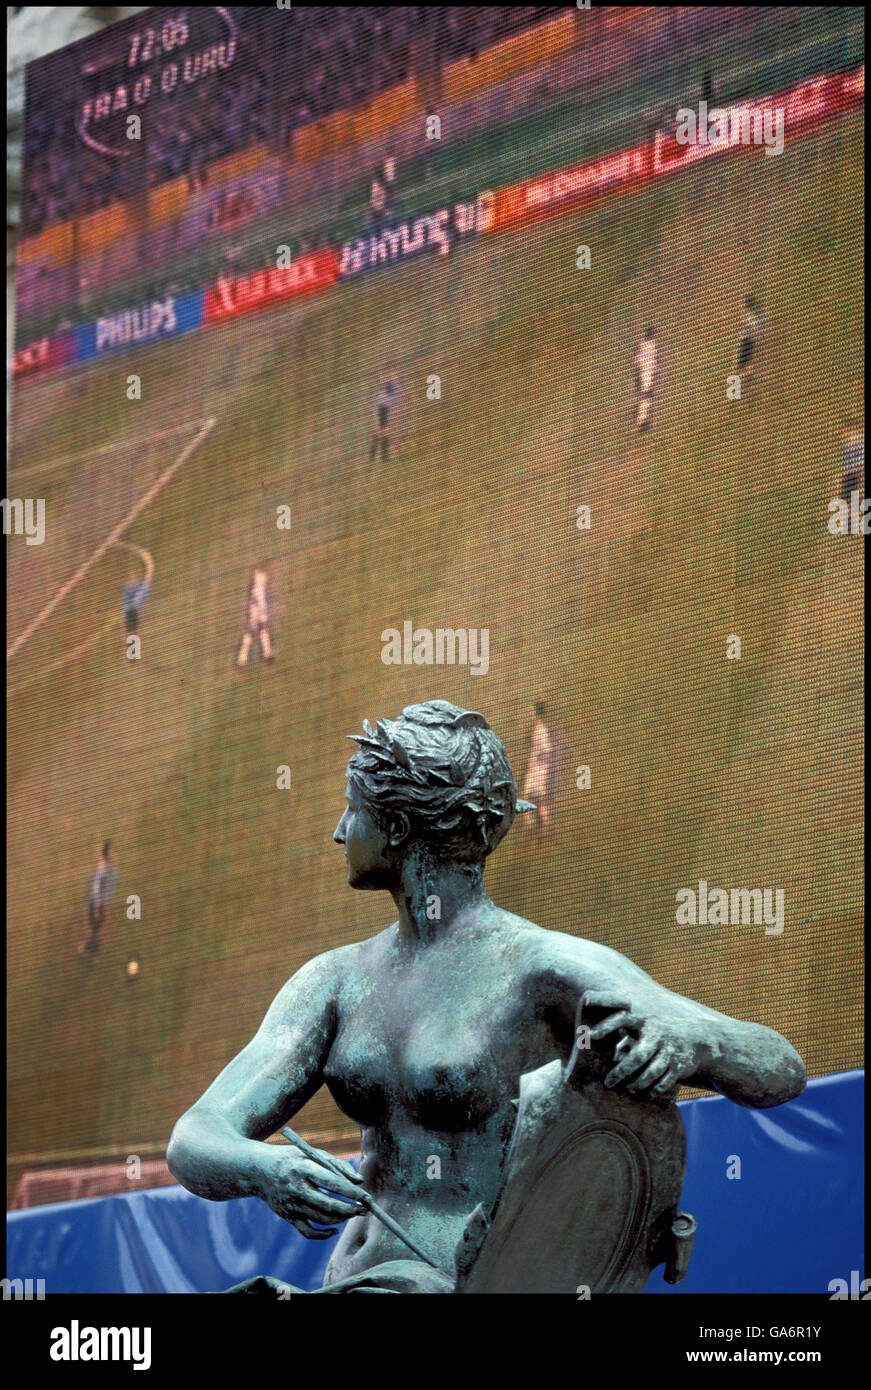 Statue at the Place de l'Hotel de Ville in Paris, France in front of giant screen showing a French national soccer team game, June 2002. Stock Photo